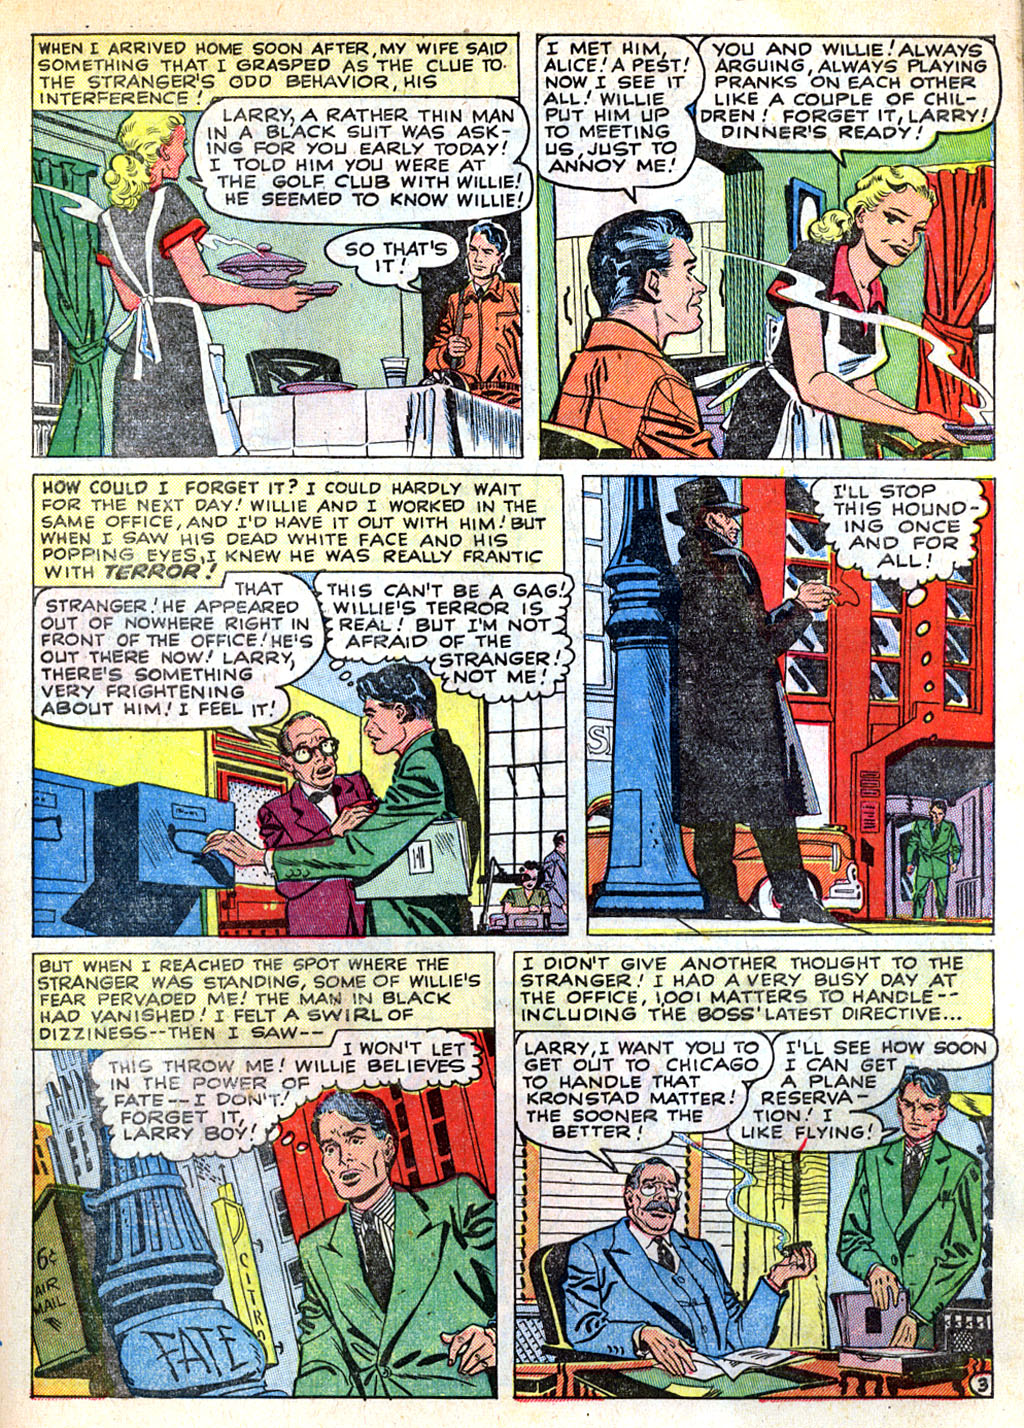 Marvel Tales (1949) 101 Page 4